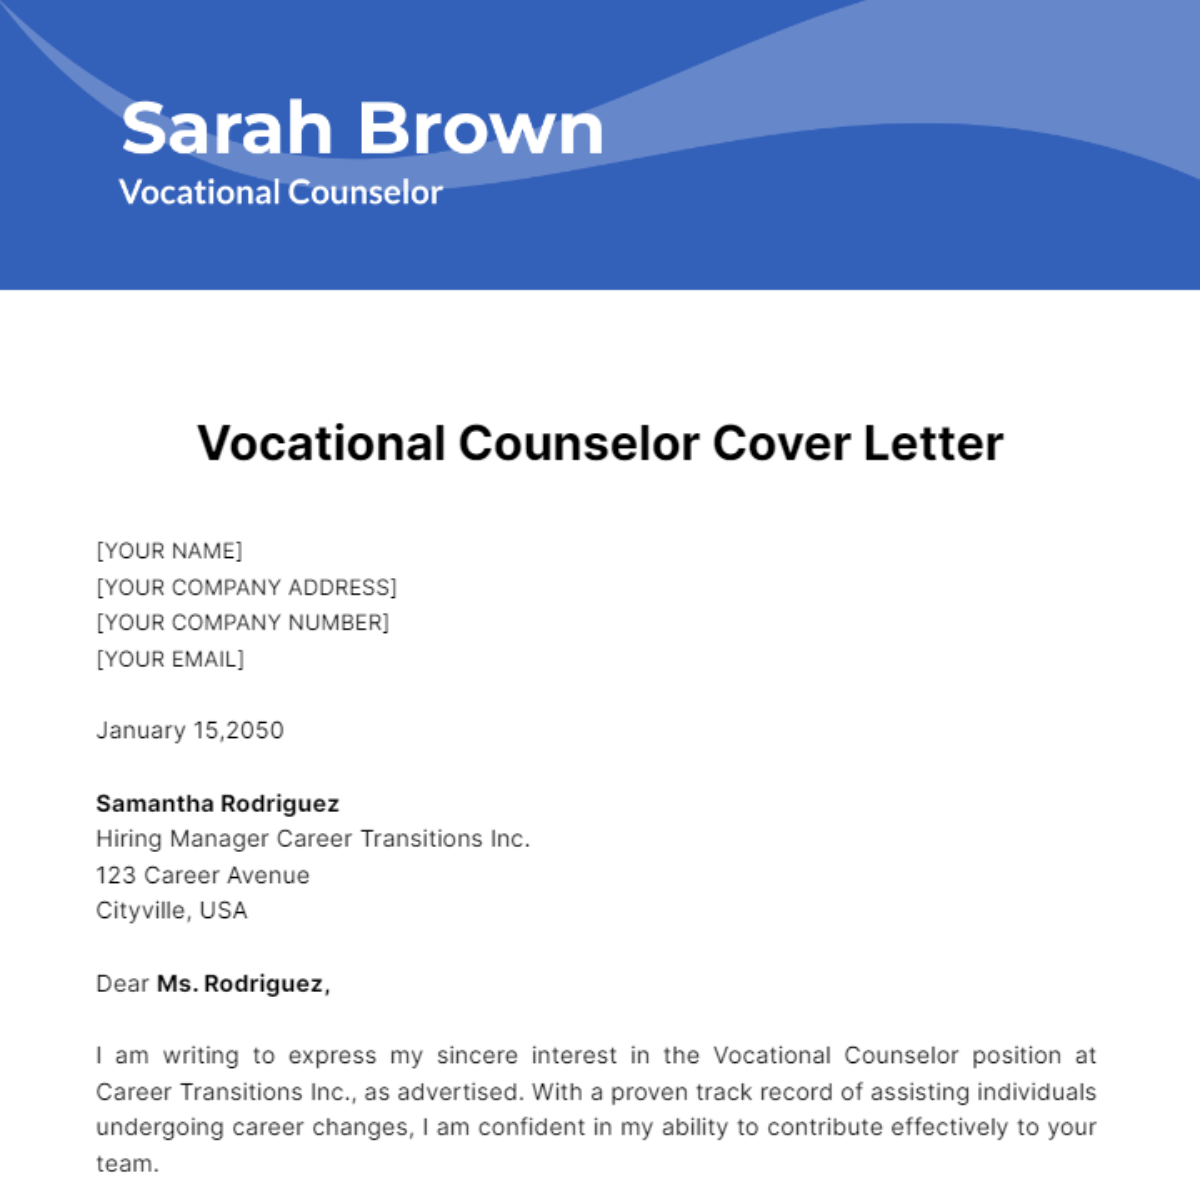 Vocational Counselor Cover Letter Template